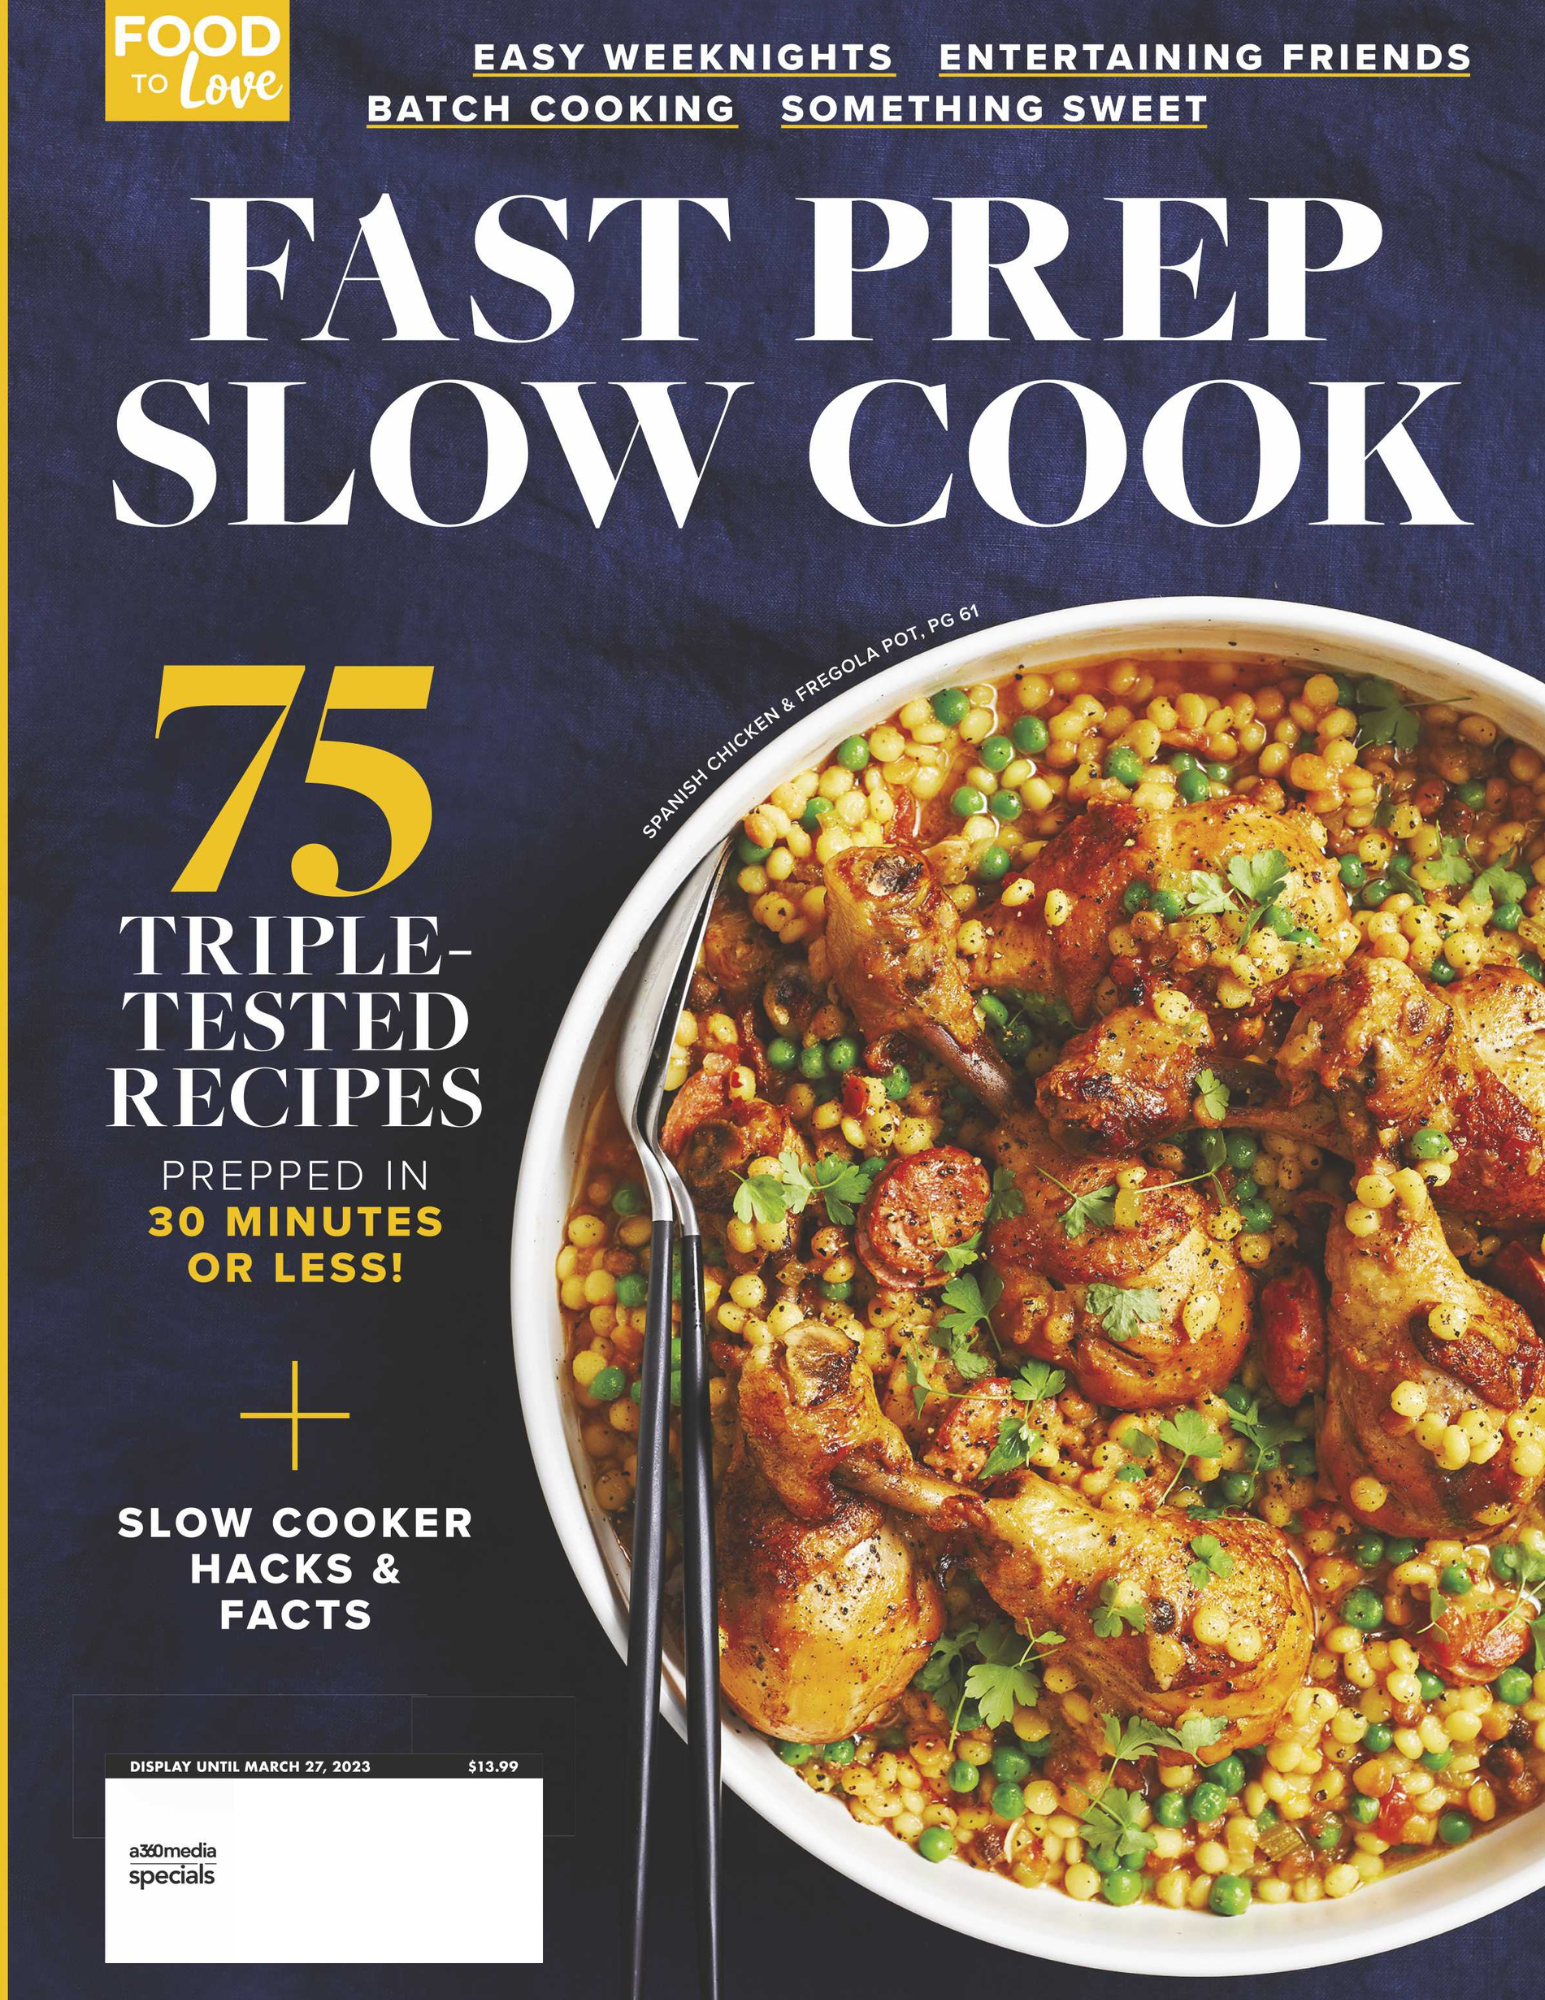 Fast Cooker – Delicious dishes in less time! - Flonal Cookware